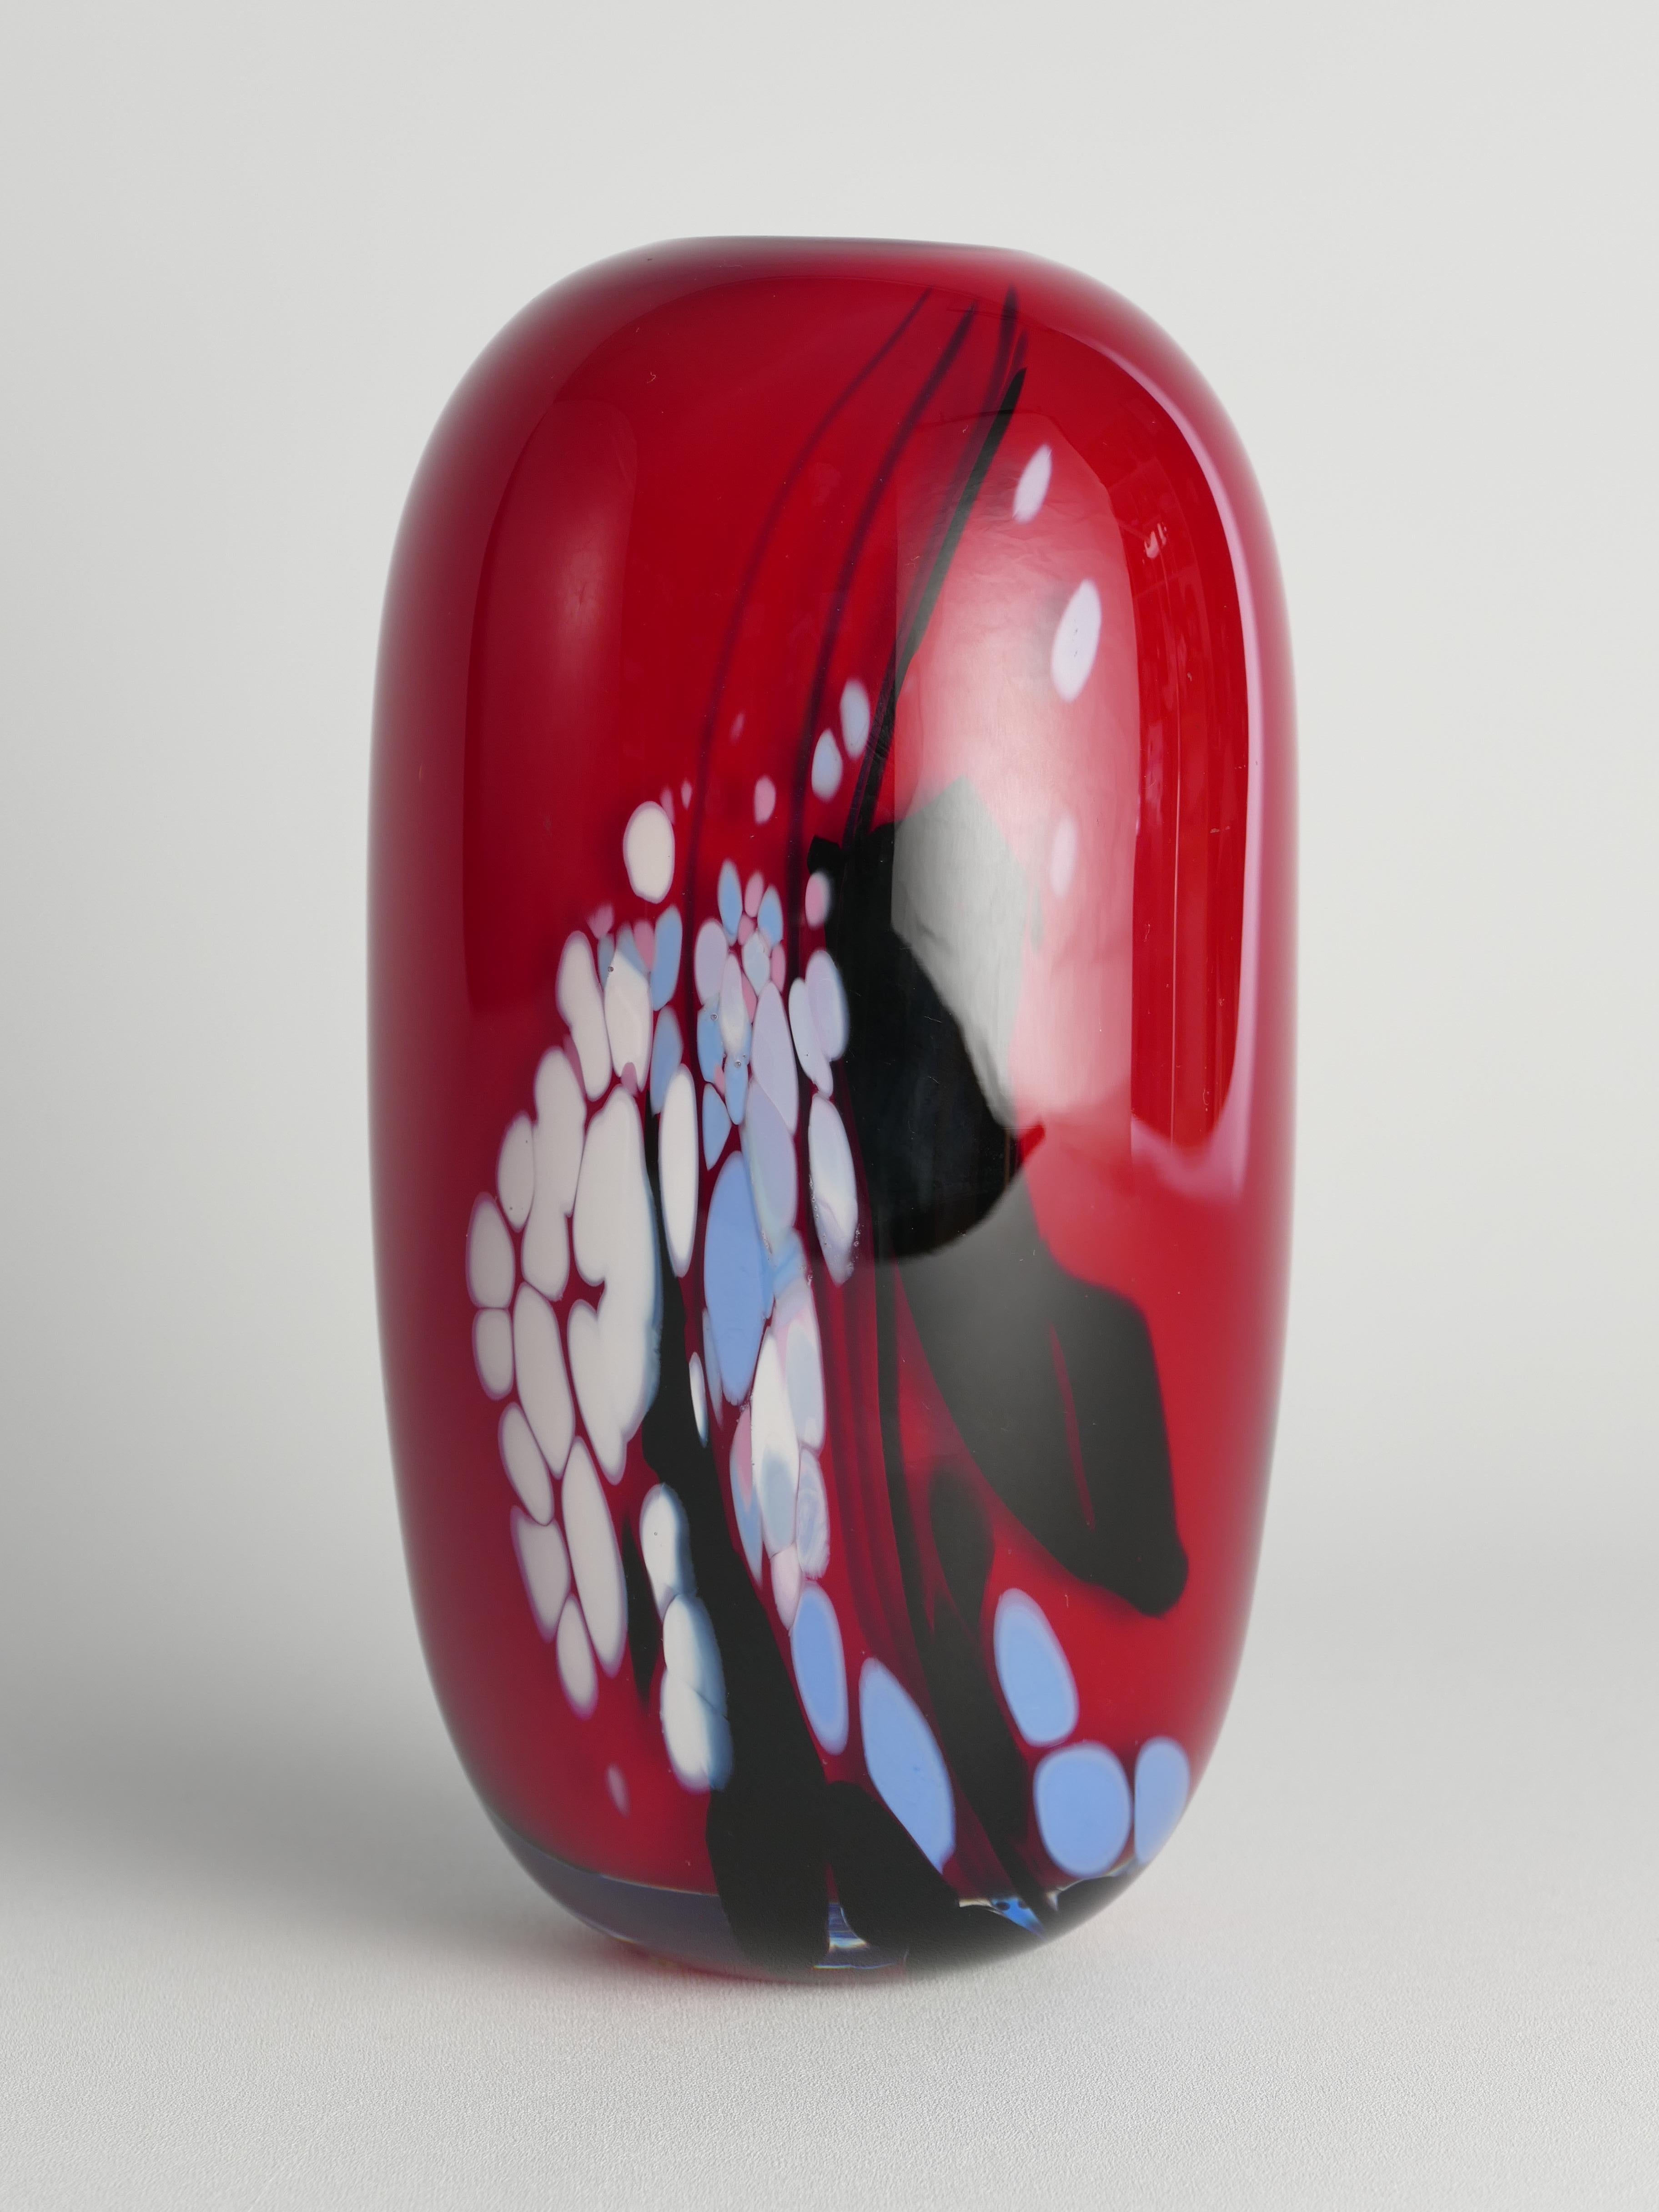 This heavy and elegant art glass vase bursting in color, is made by the glass master Mikael Axenbrant in 1990. Glossy red like a delicate cherry with blue, white, and black strokes and dots.

Engraved: 